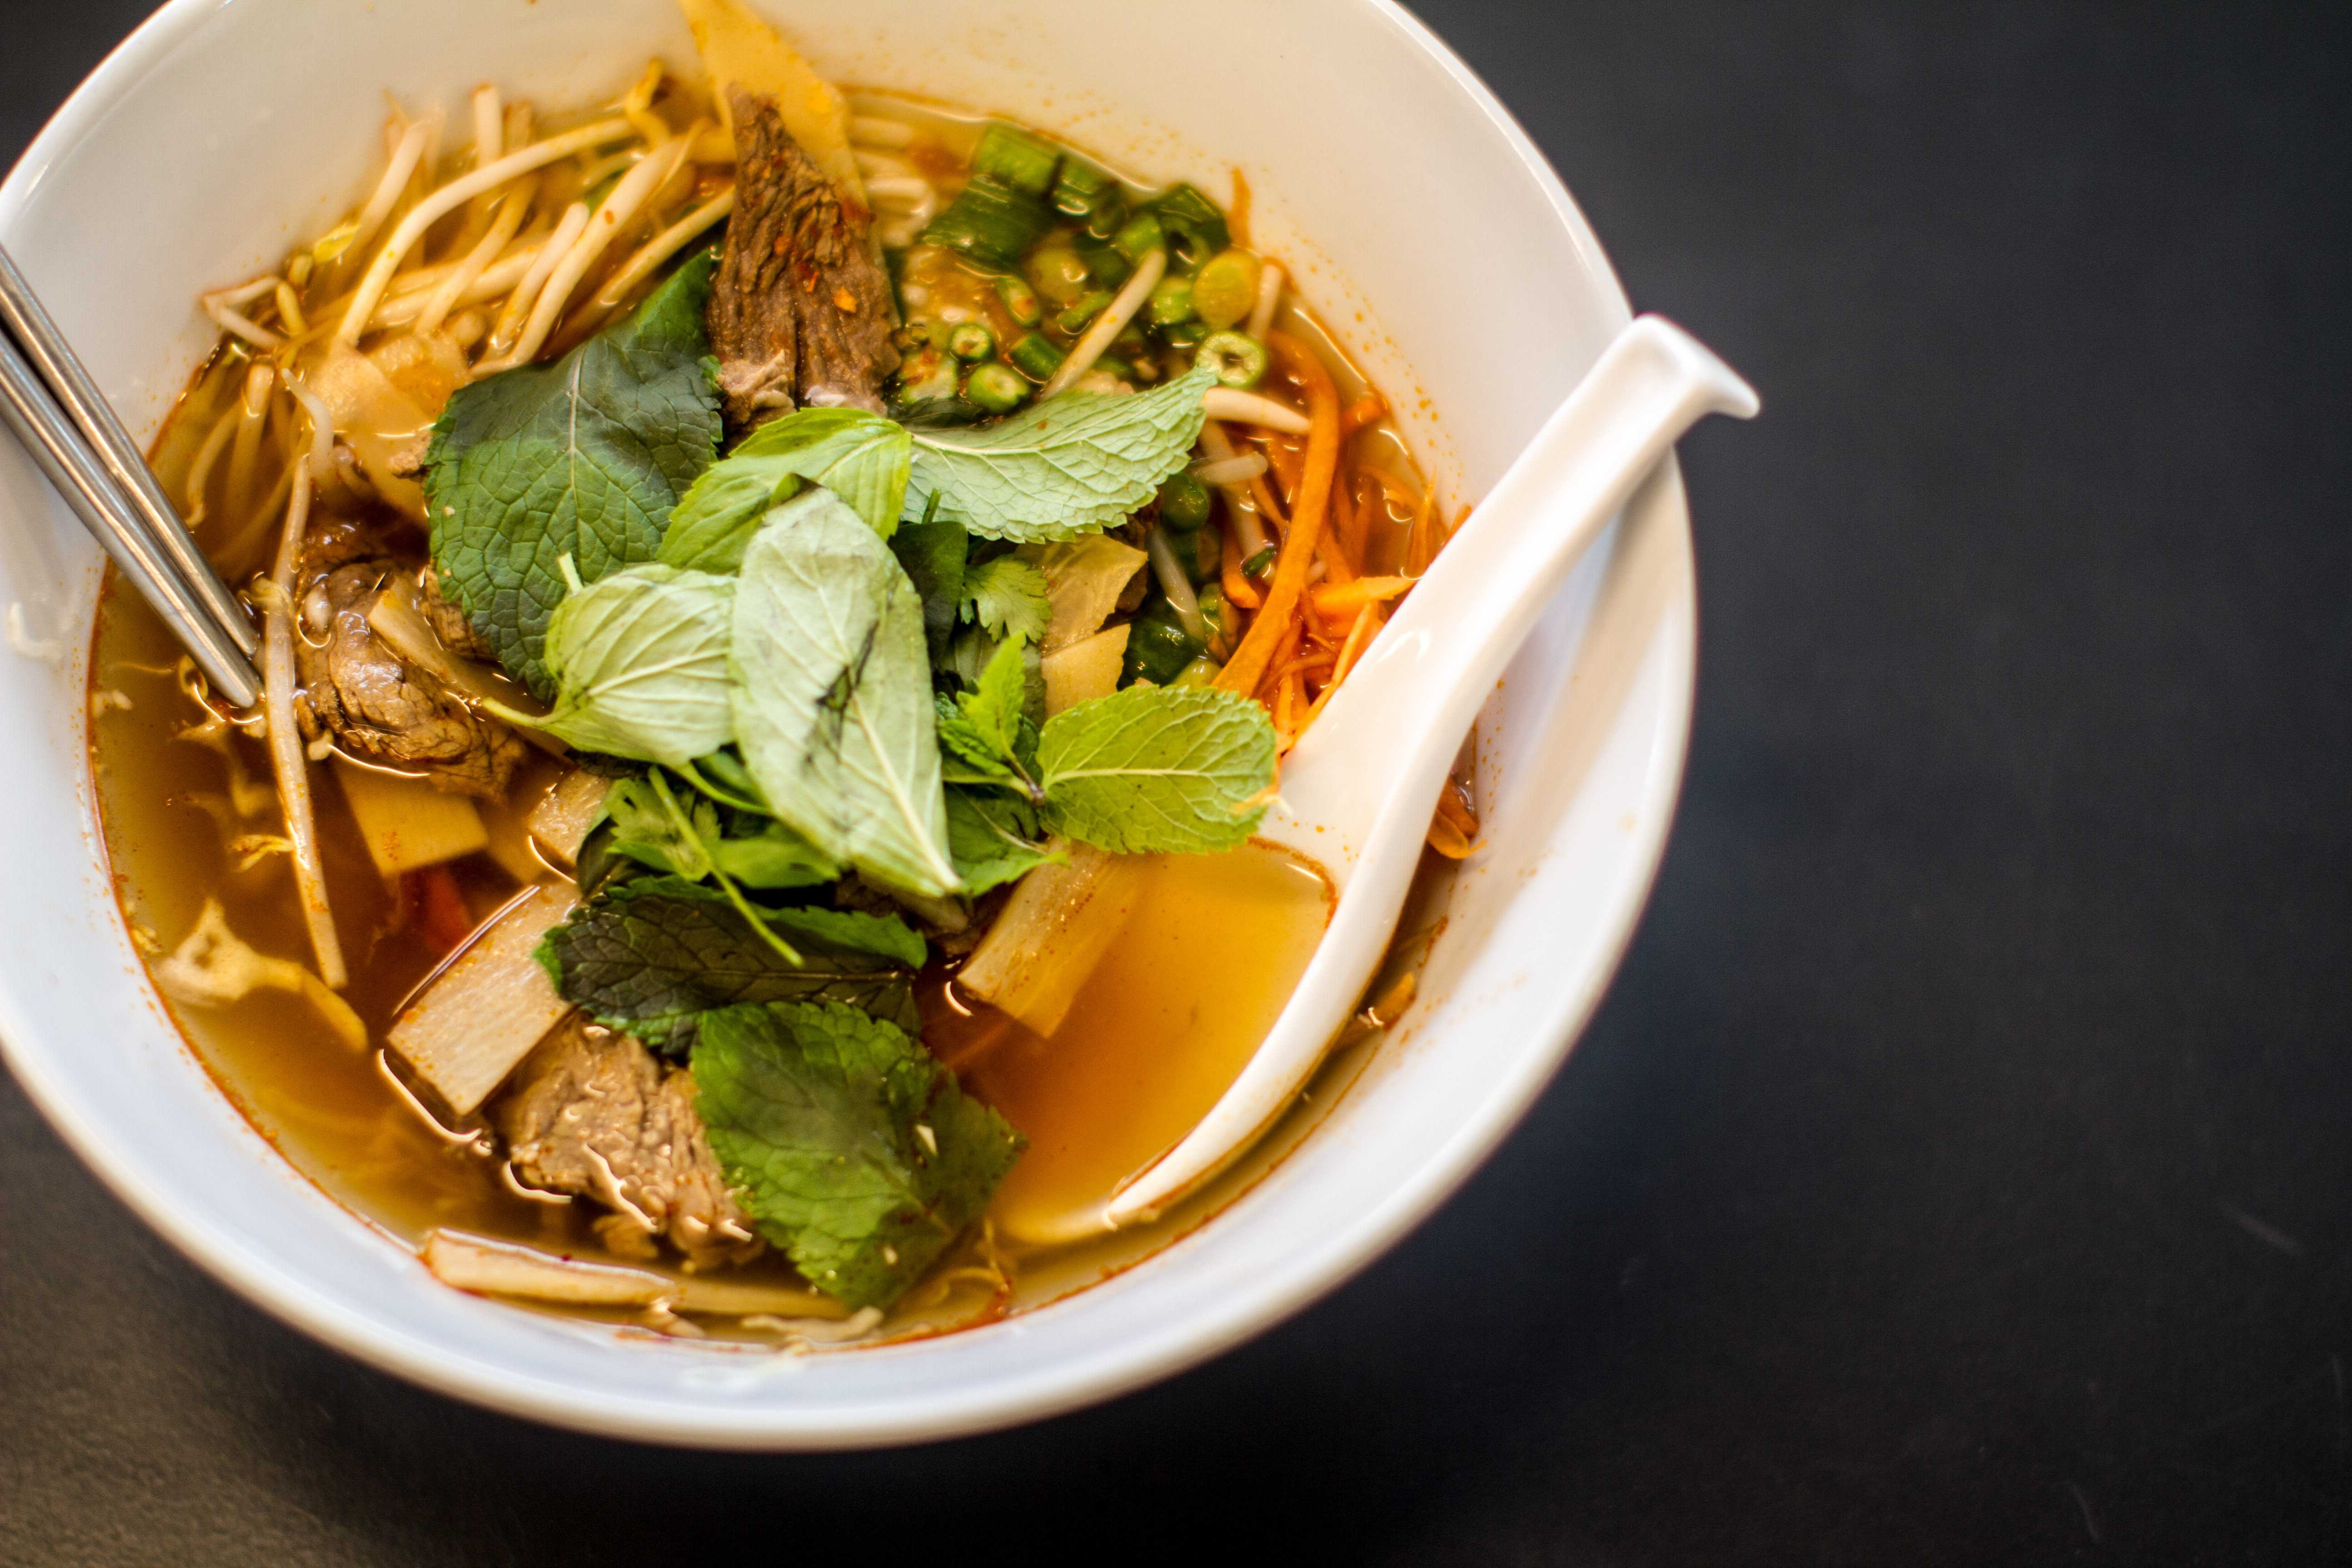 COURTESY FOODHINI Customers of Foodhini seek ethnic foods such as this Laotian soup, Khao Poon Nam Seen, a tomato-based broth with cuts of beef and bamboo, poured over rice noodles with mint and basil.